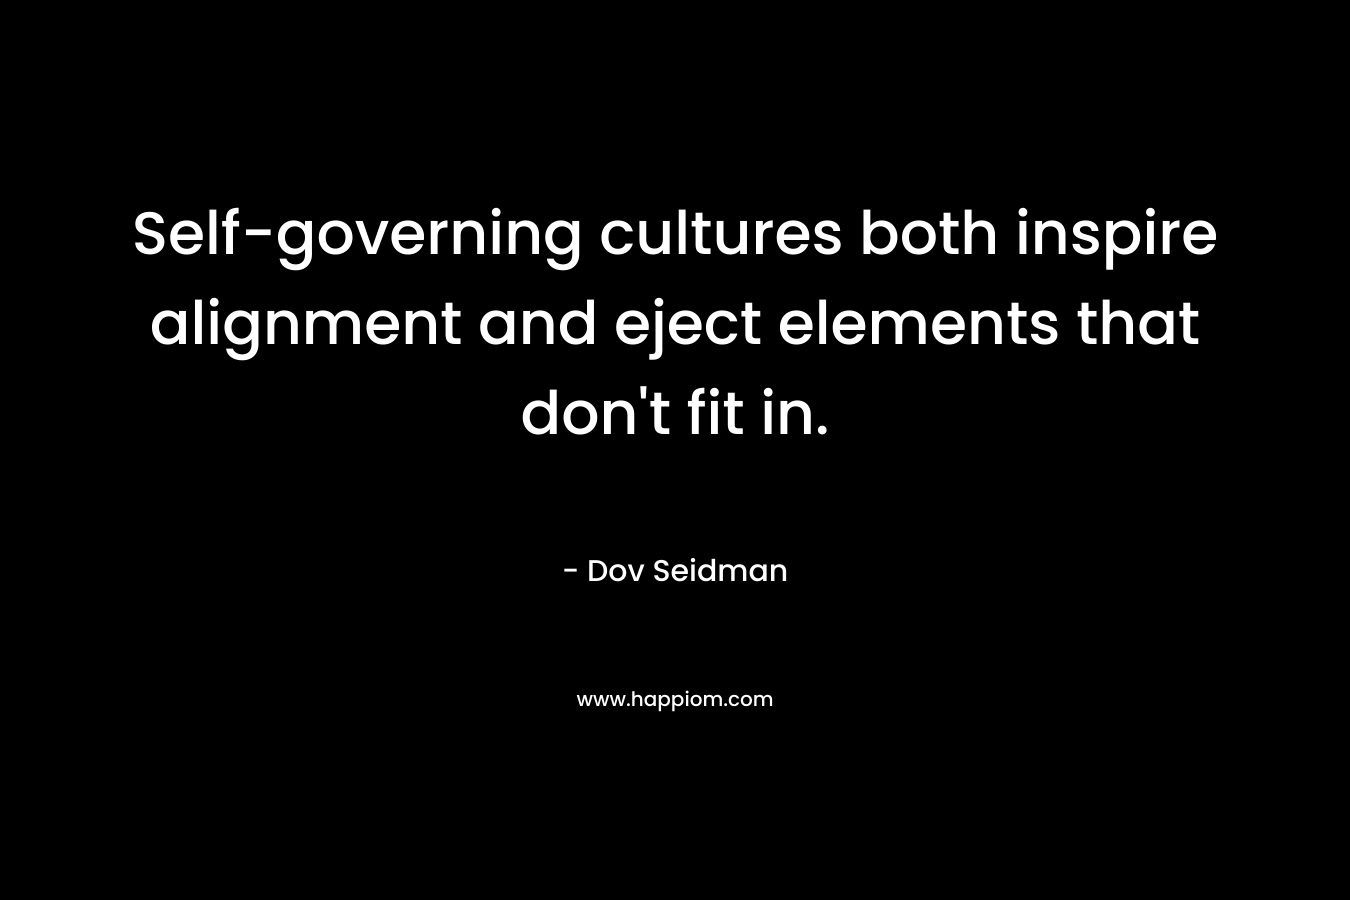 Self-governing cultures both inspire alignment and eject elements that don’t fit in. – Dov Seidman